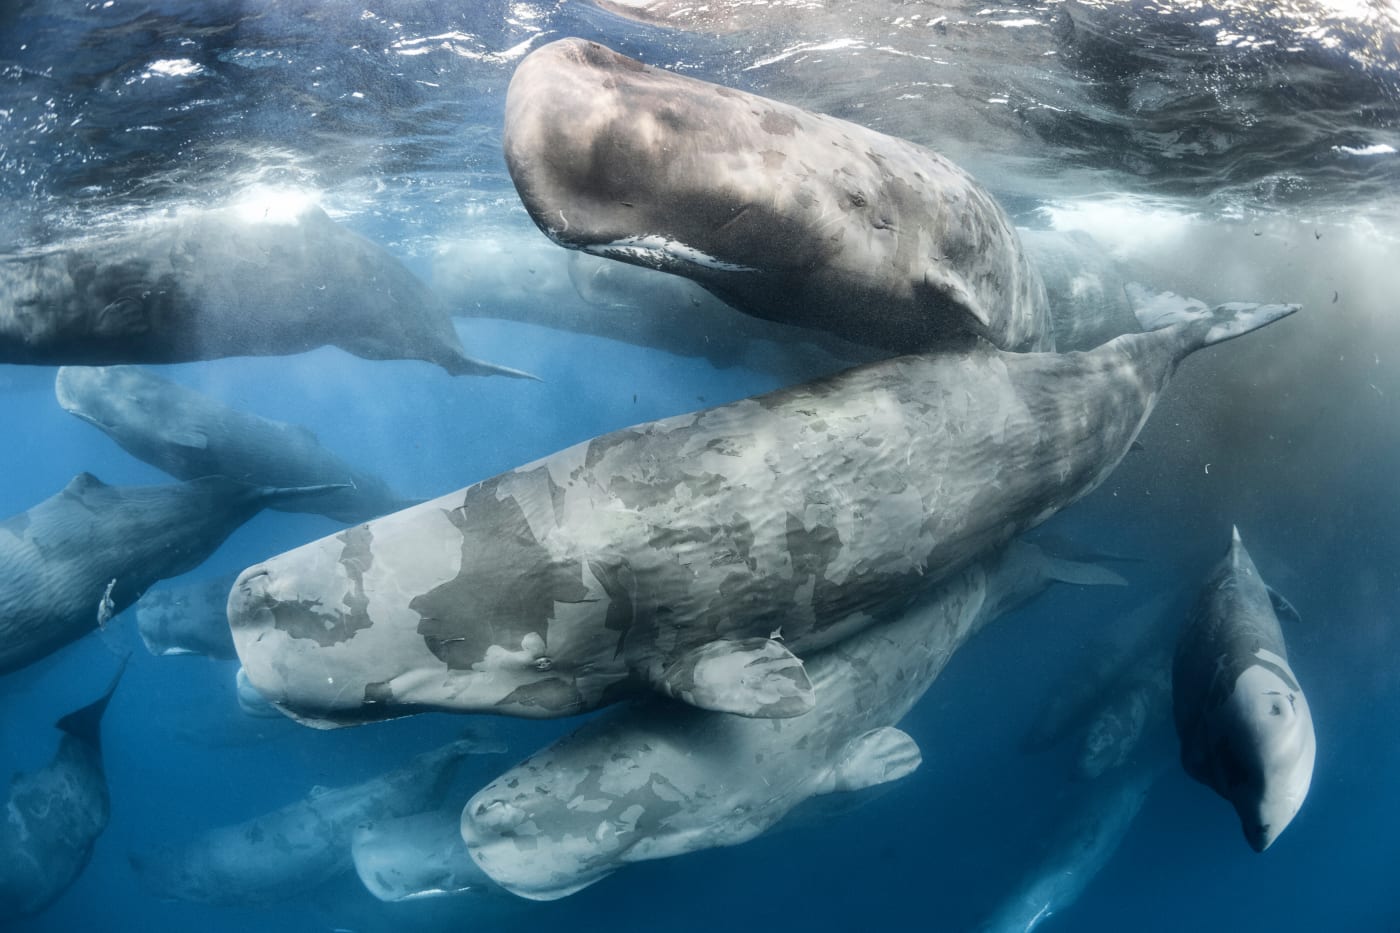 Large aggregation of Sperm whales (Physeter macrocephalus) engaged in social activity.